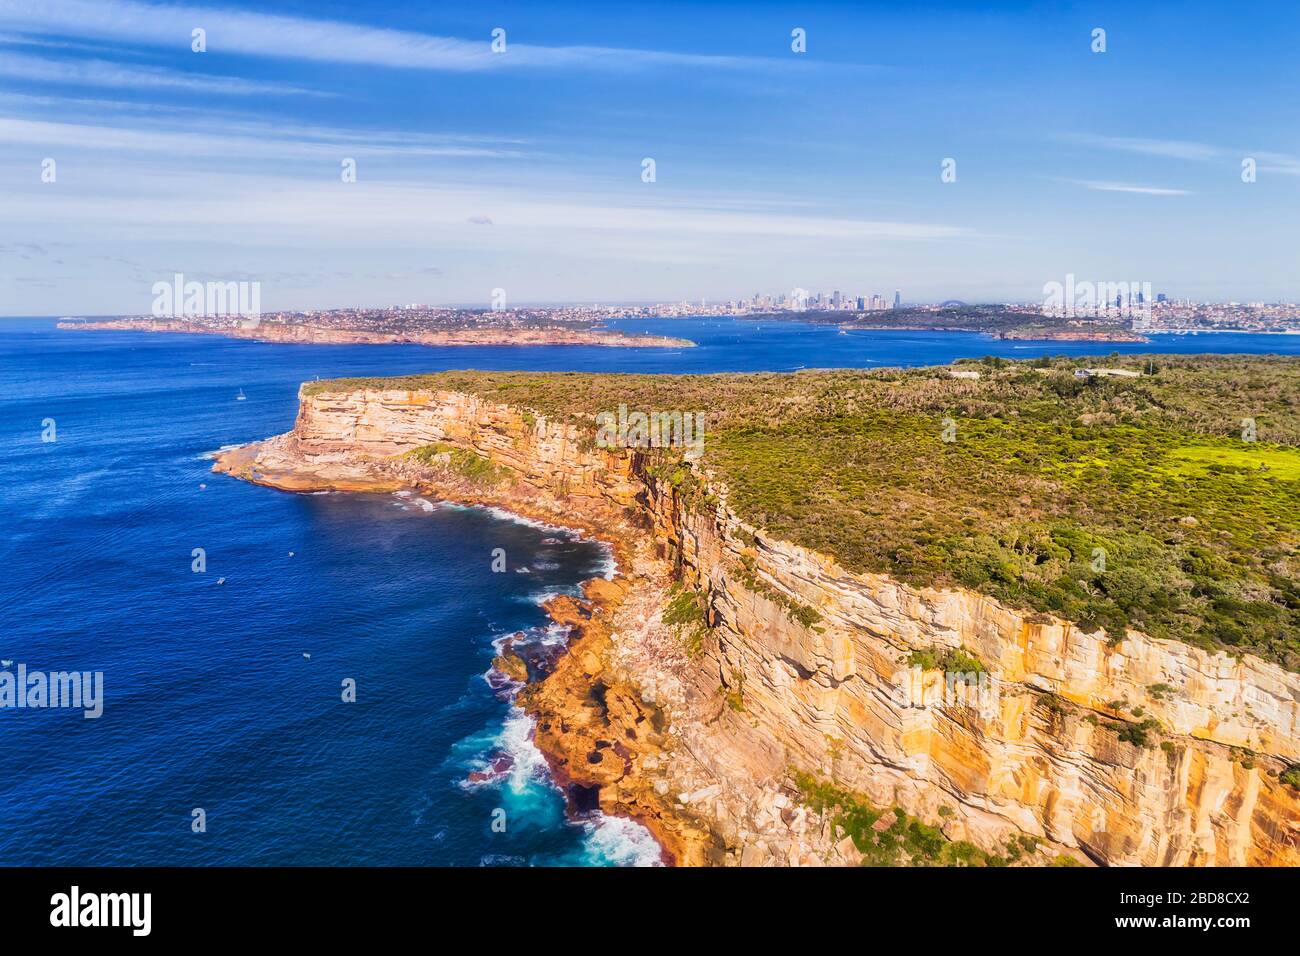 Bright blue pacific ocean and sky over  sandstone heads at the entrance to Sydney harbour in elevated aerial view towaards city CBD. Stock Photo